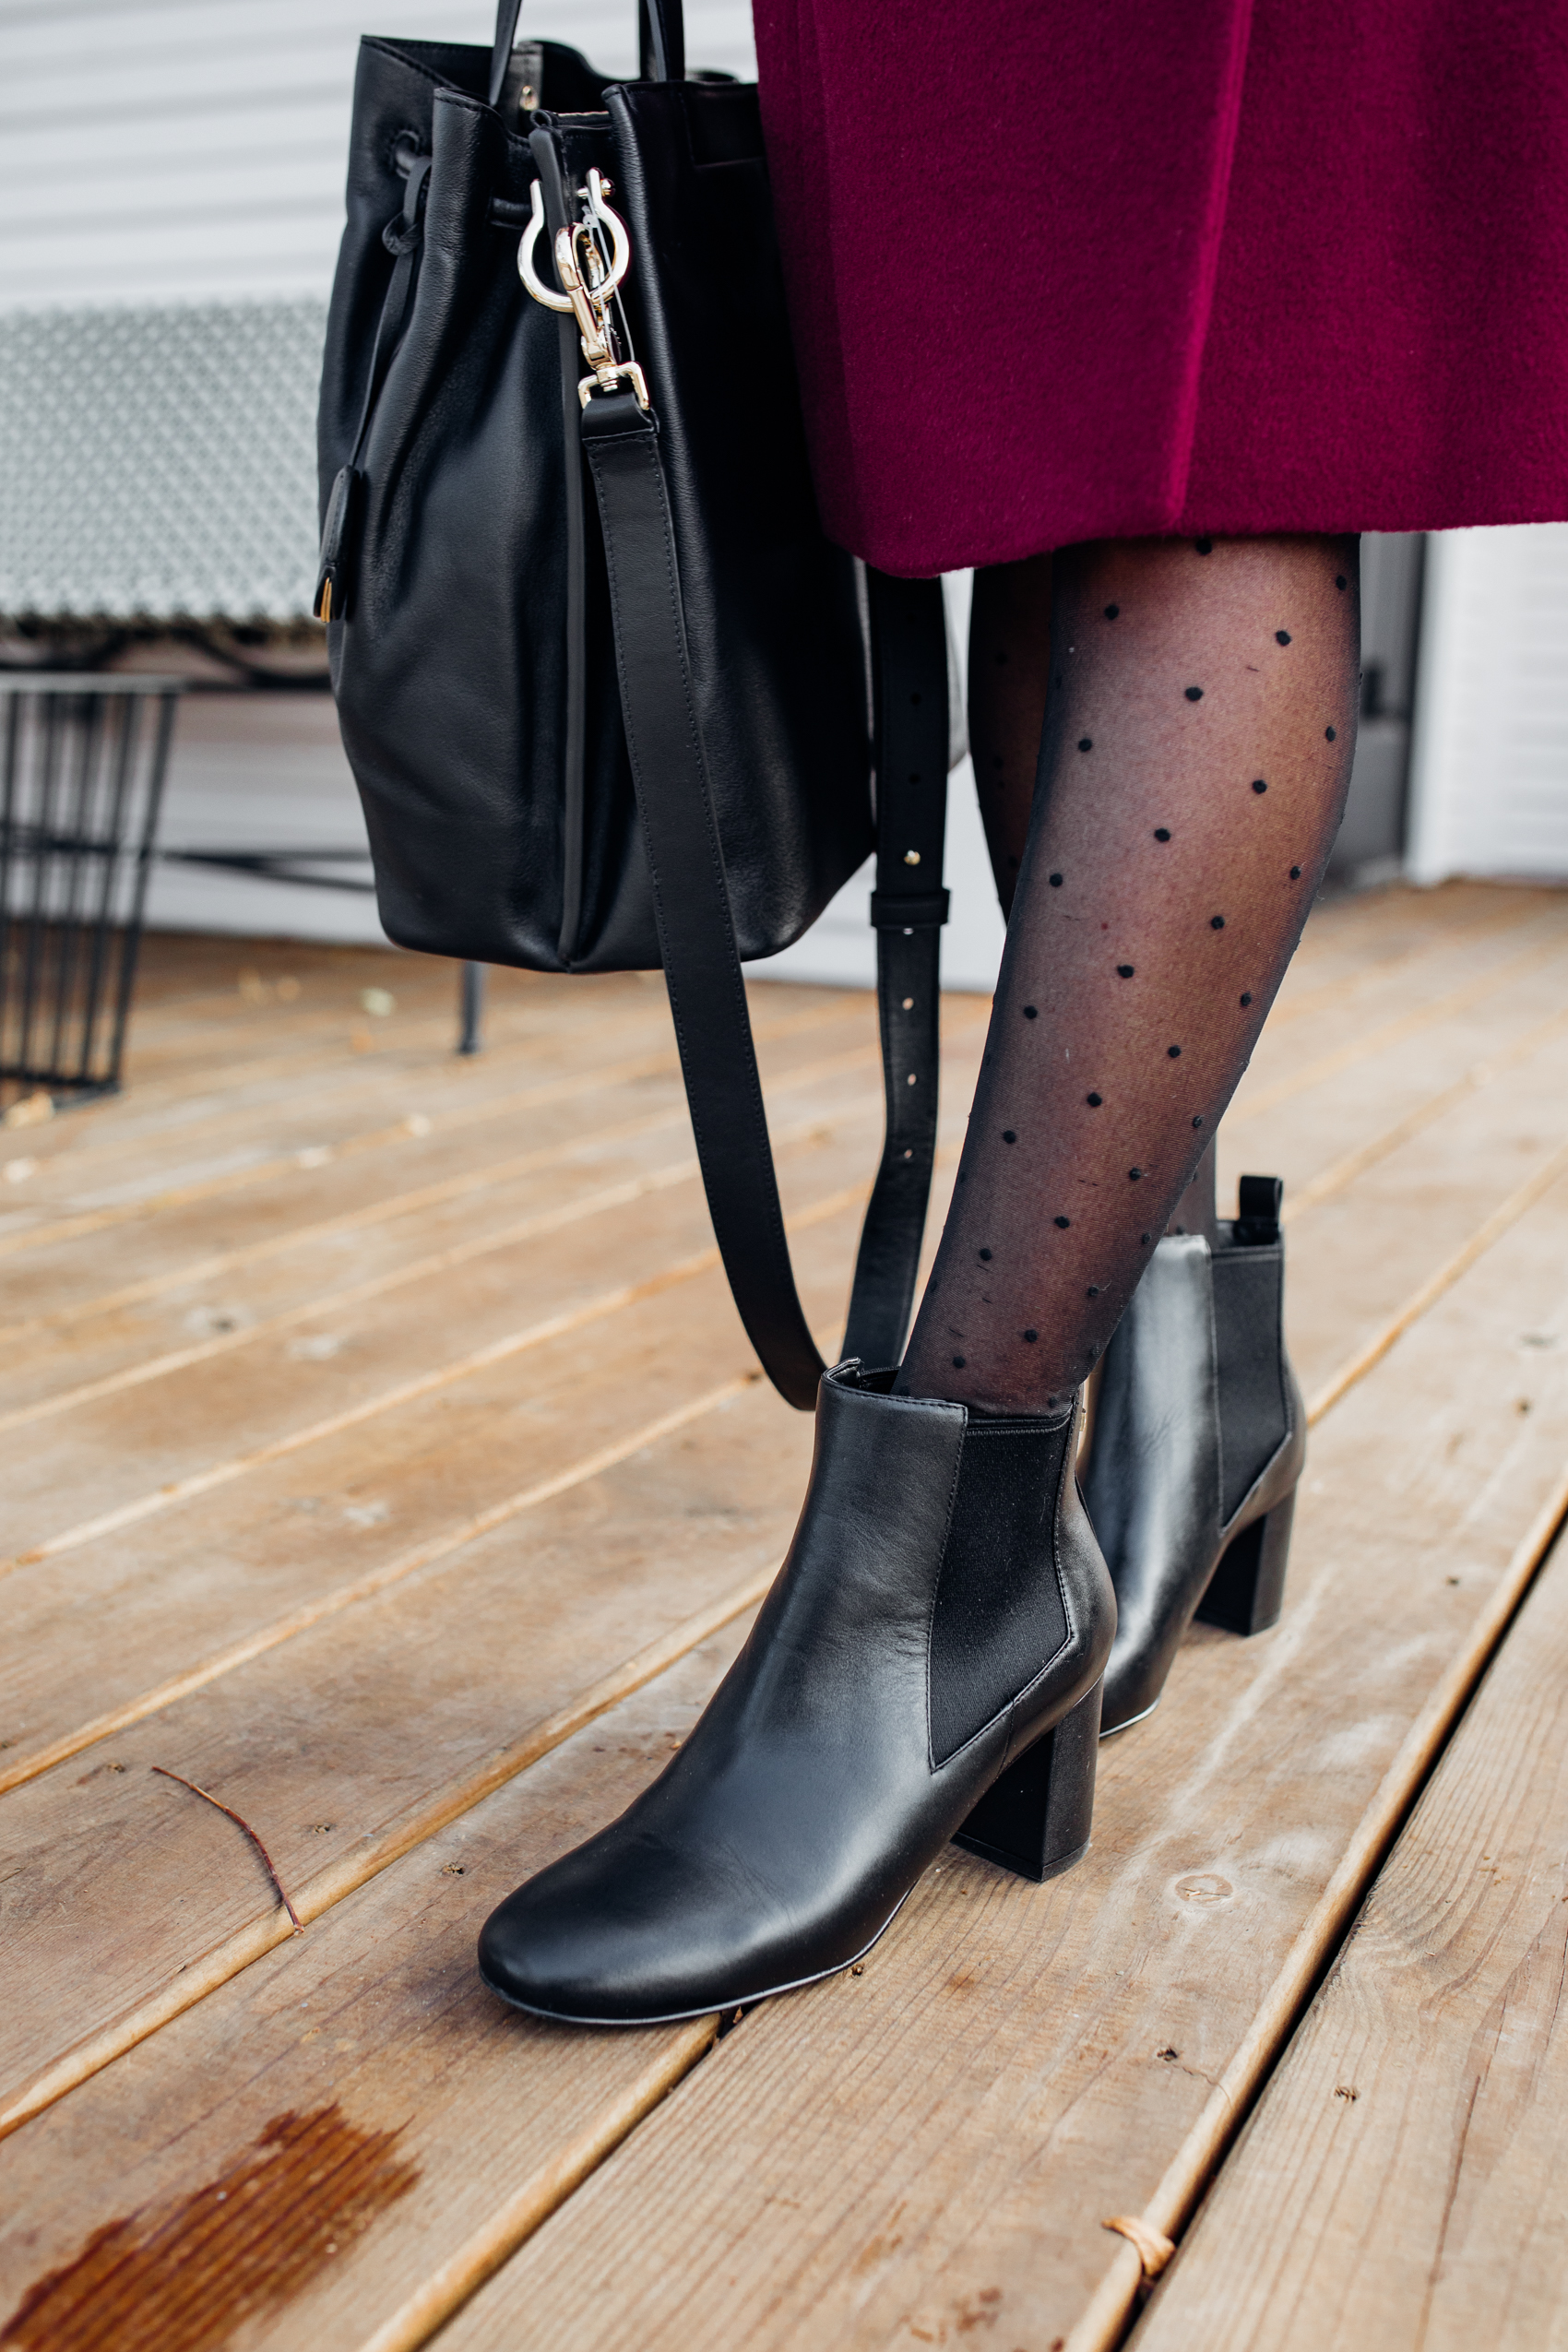 Comfy booties for fall and winter with polka dot tights